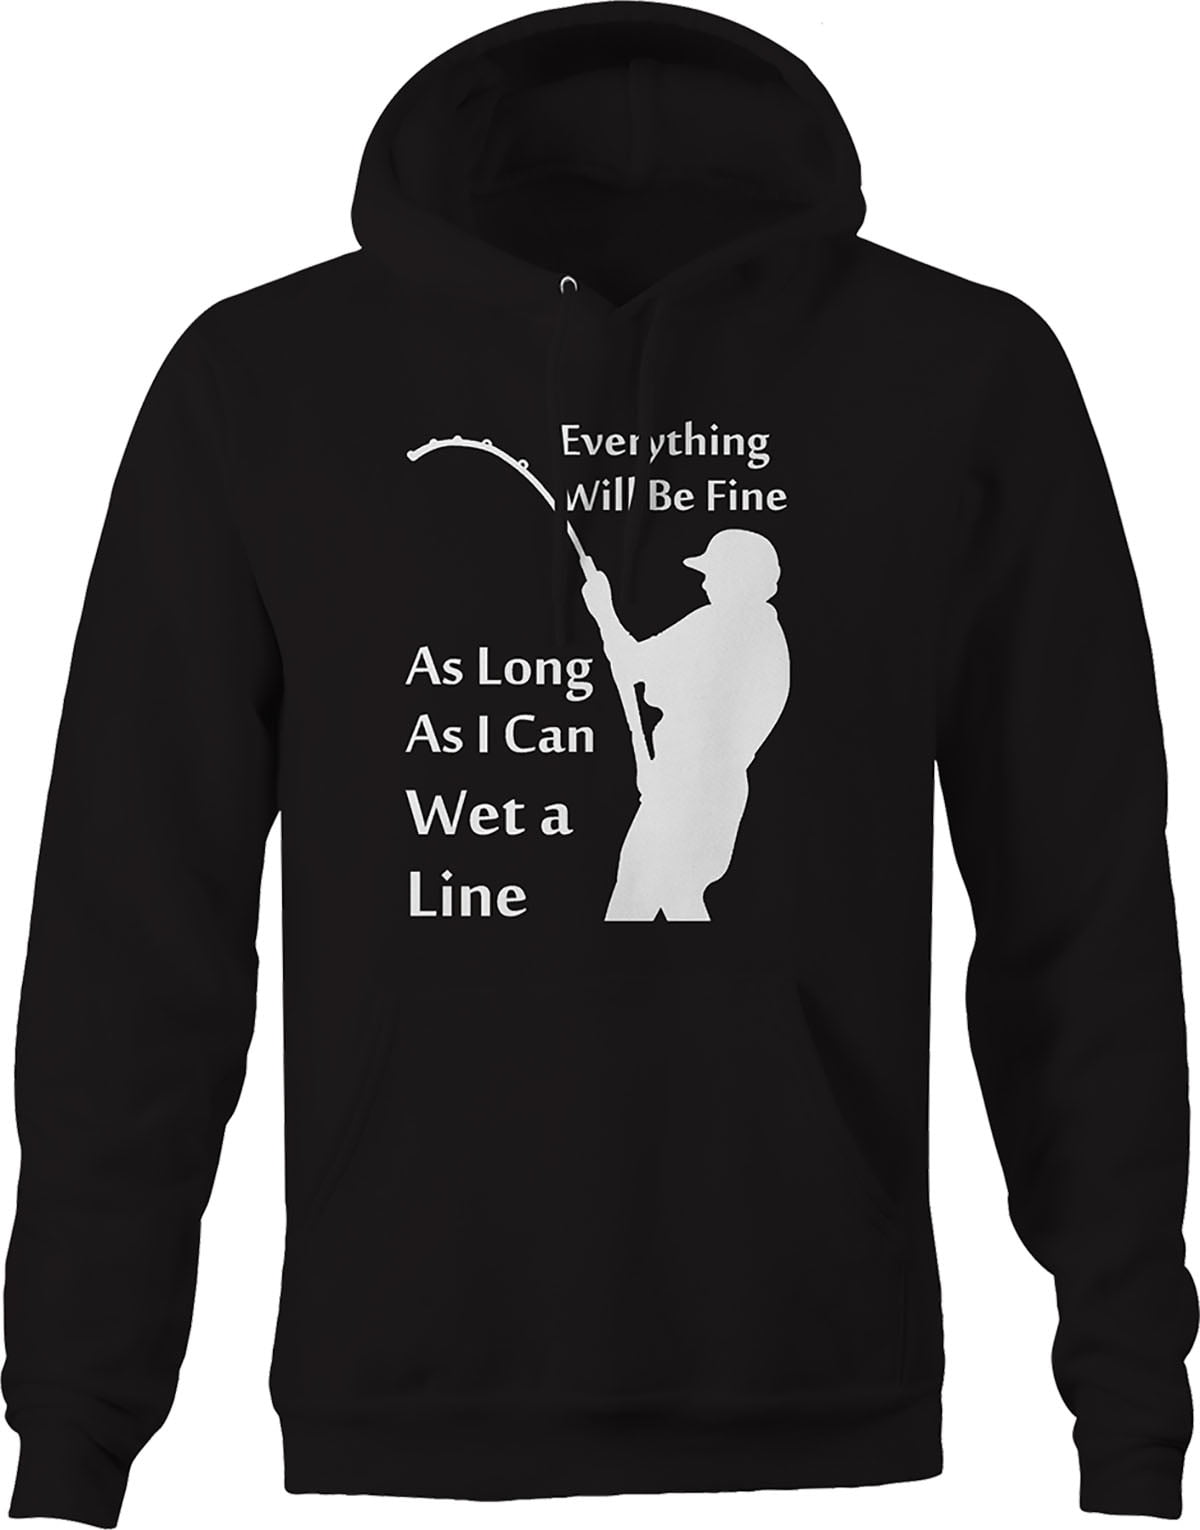 Everything Will Be Fine Wet a Line Fly Fishing Graphic Hoodies Xlarge Black  